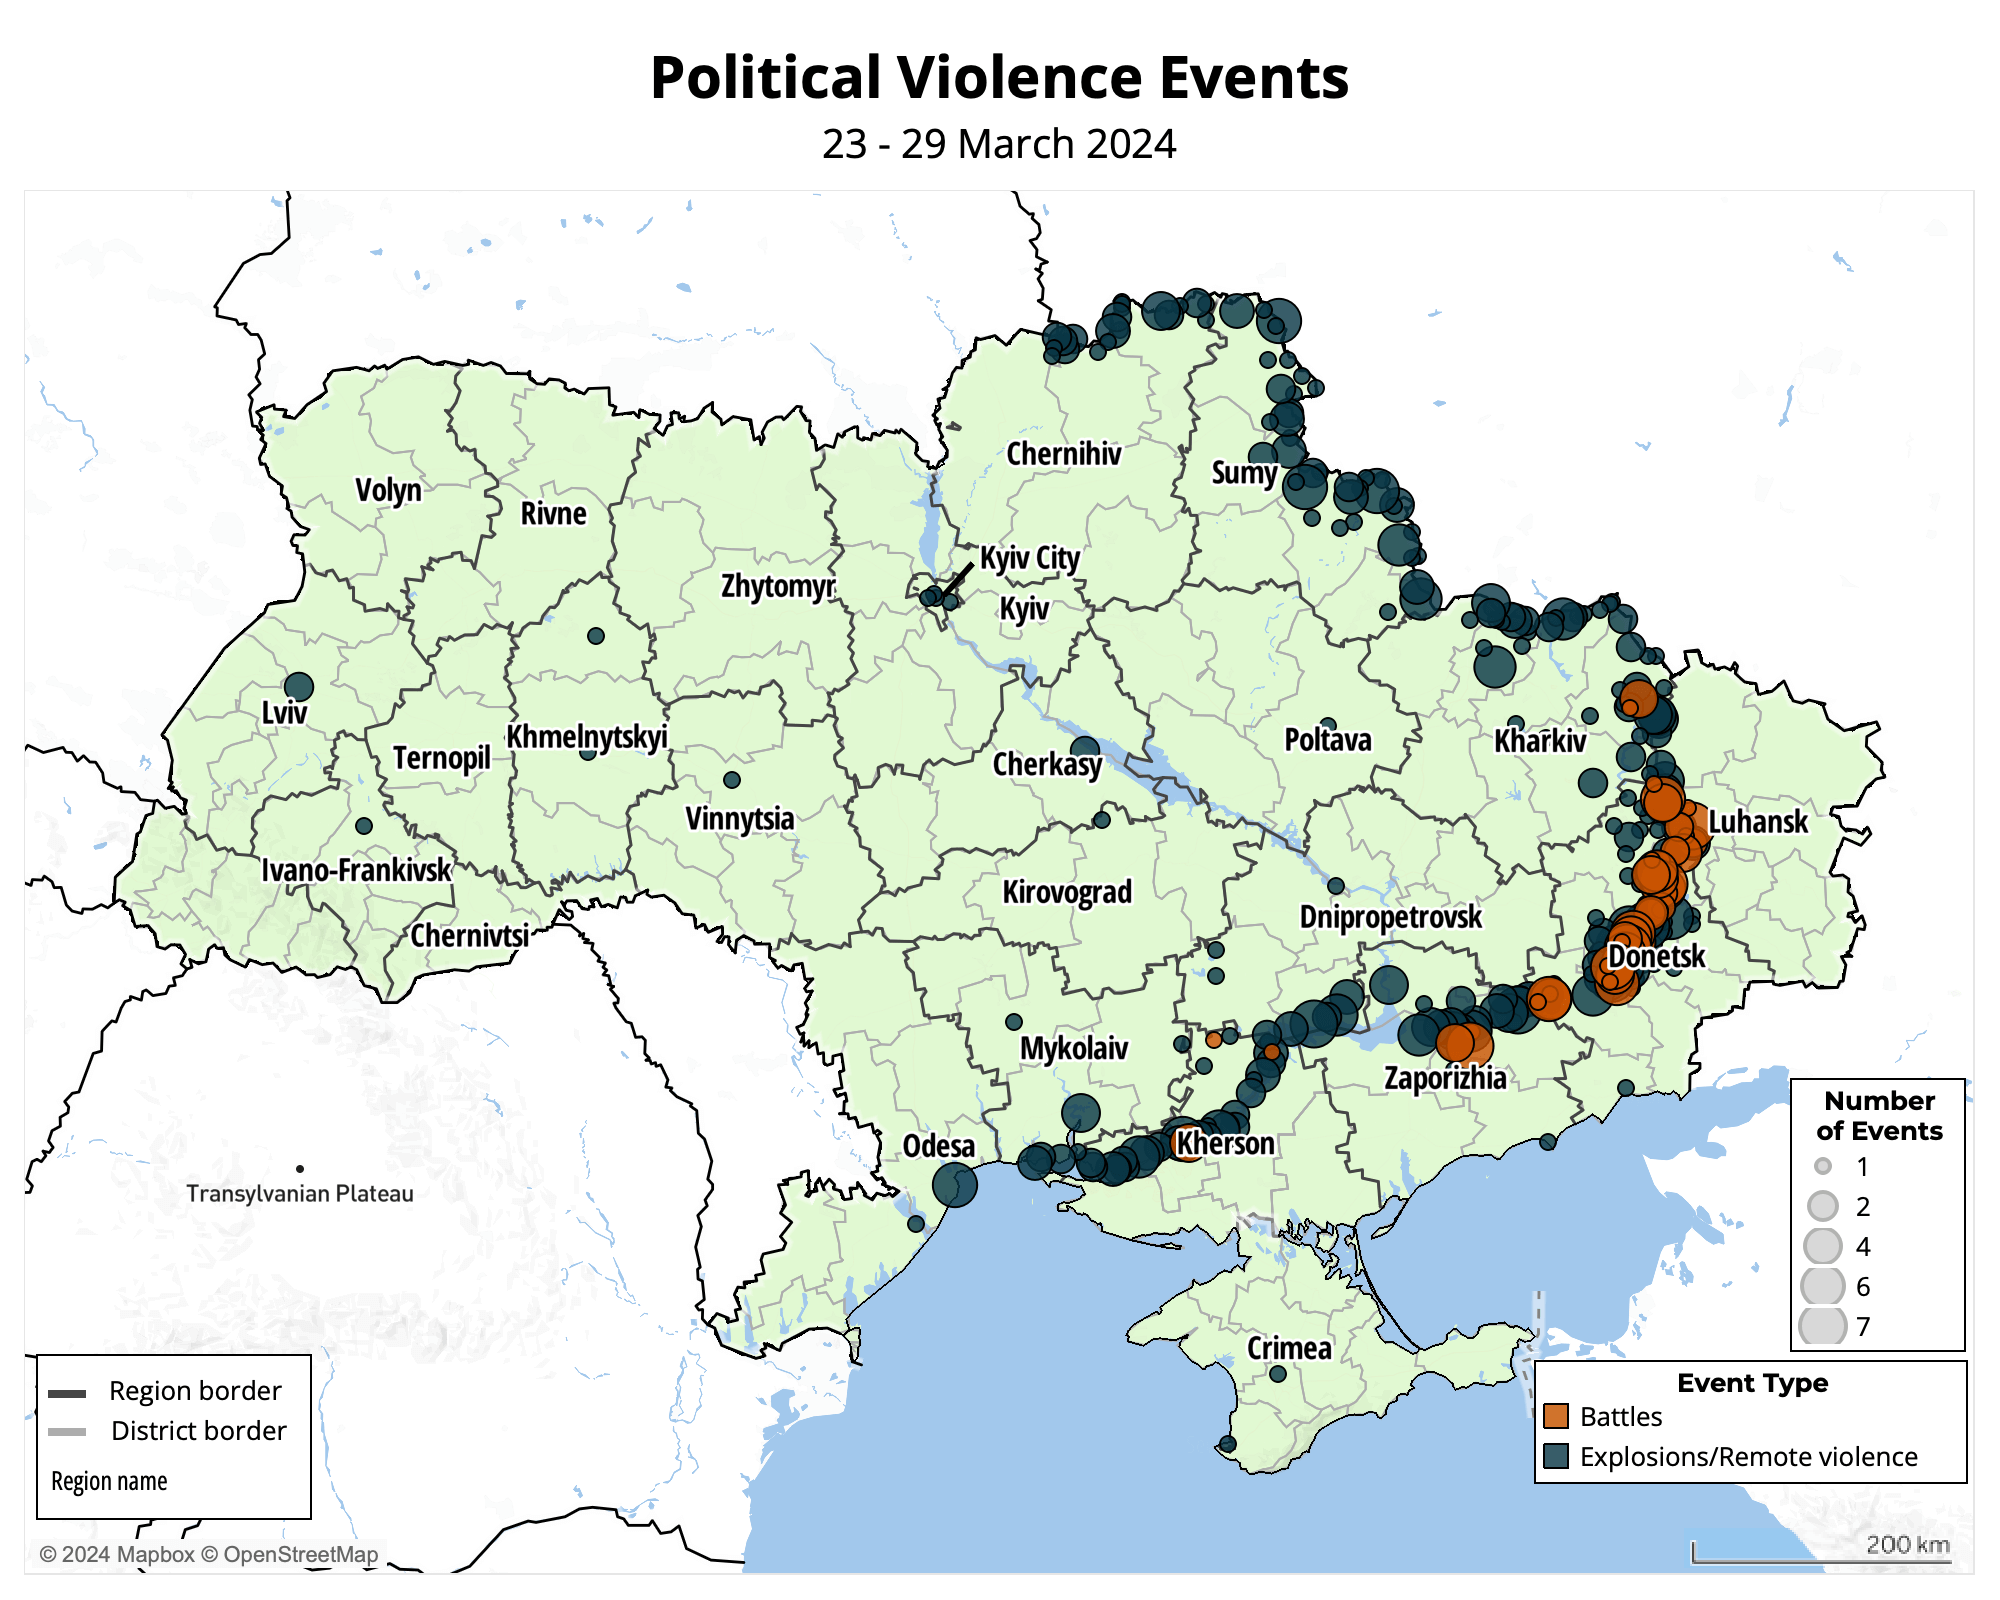 Ukraine Conflict Monitor Map and Infographic Political Violence events - 23-29 March 2024